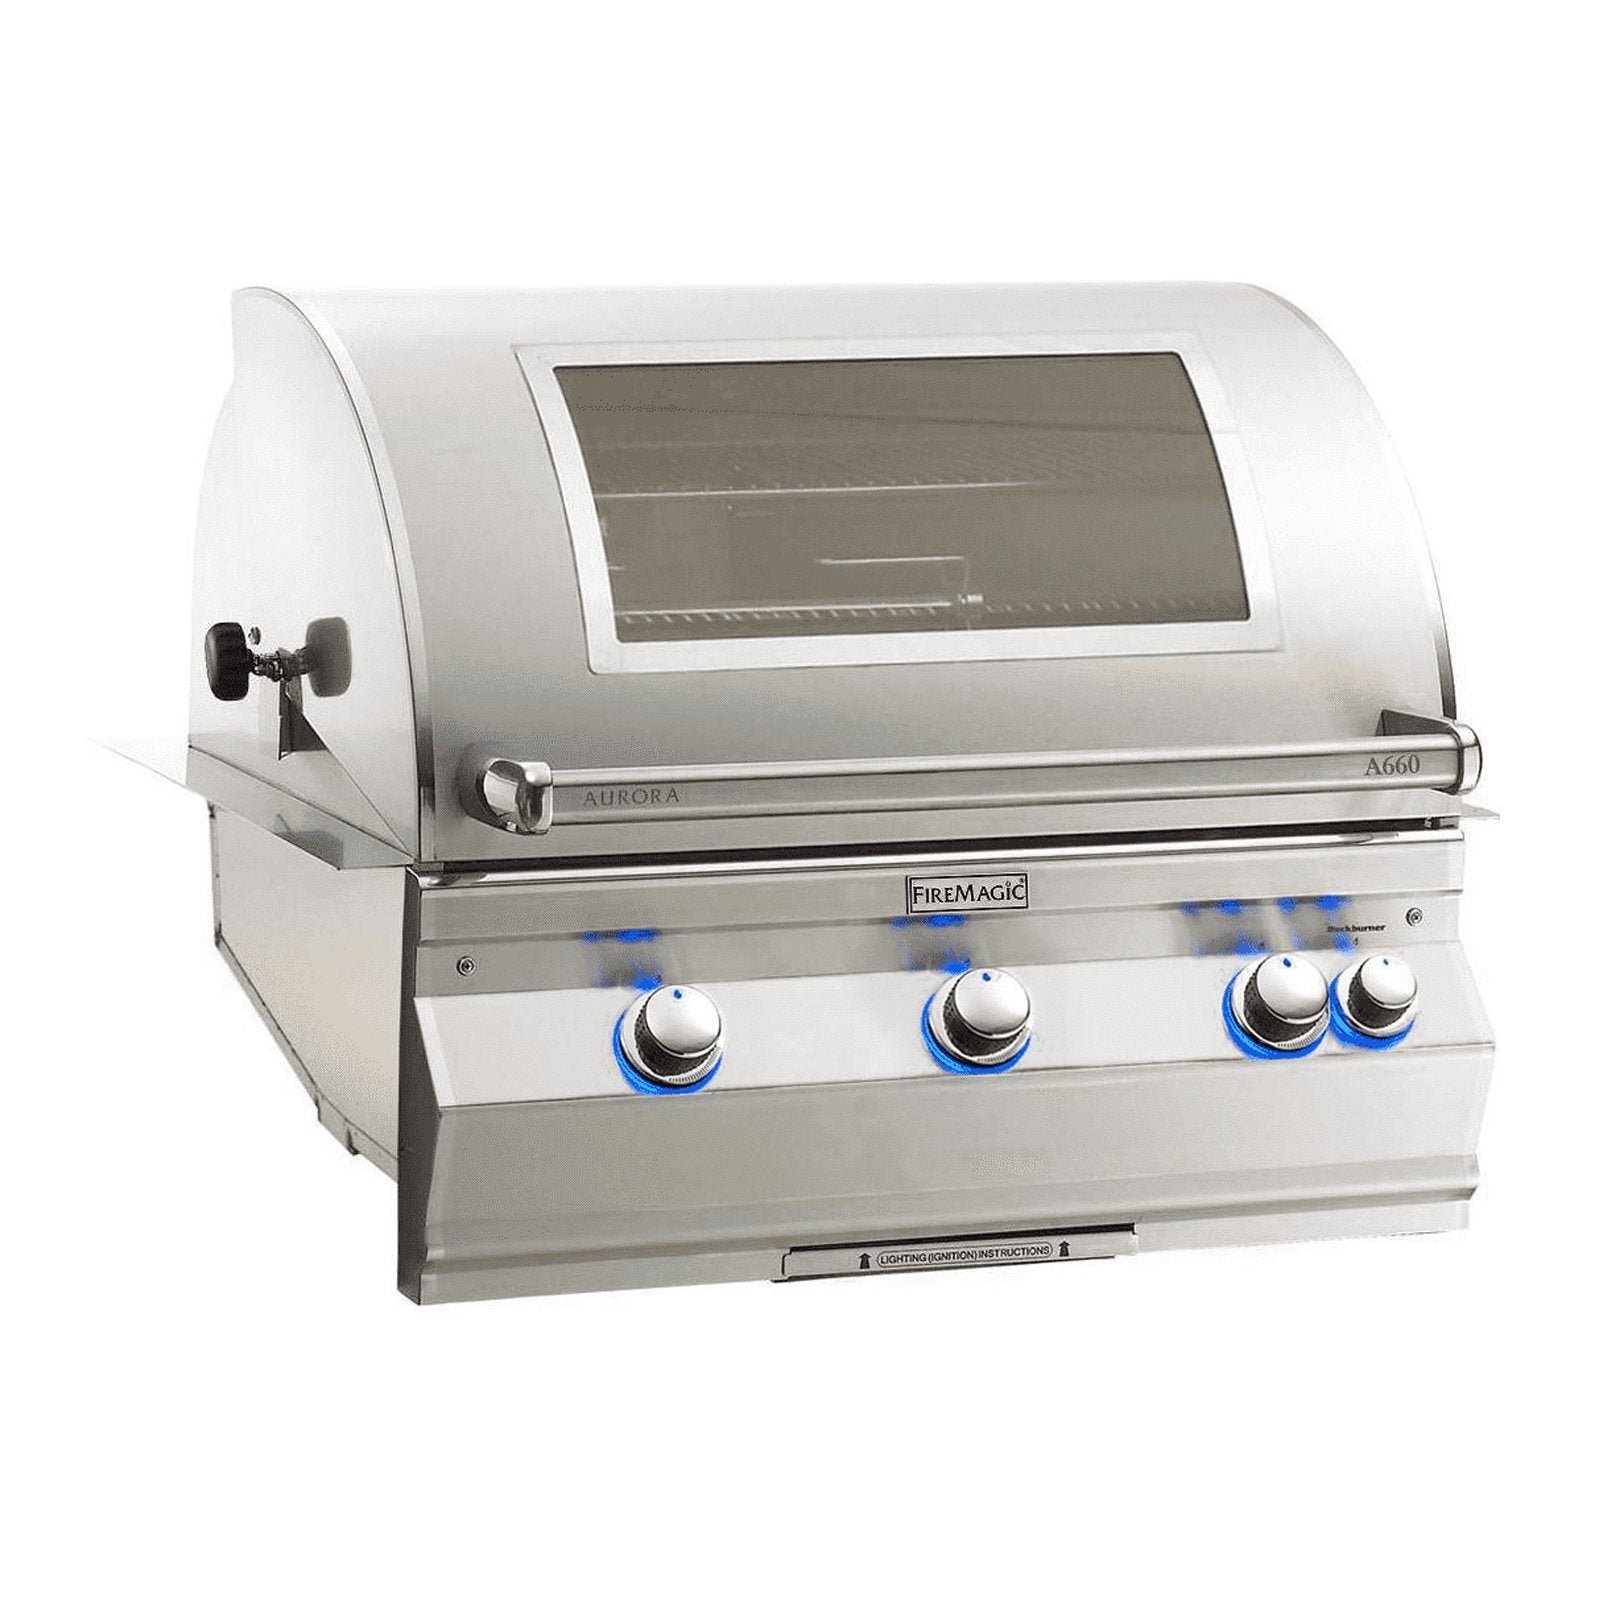 fire-magic-30-a660i-built-in-grill-w-infra-burner-rotiss-analog-display 1